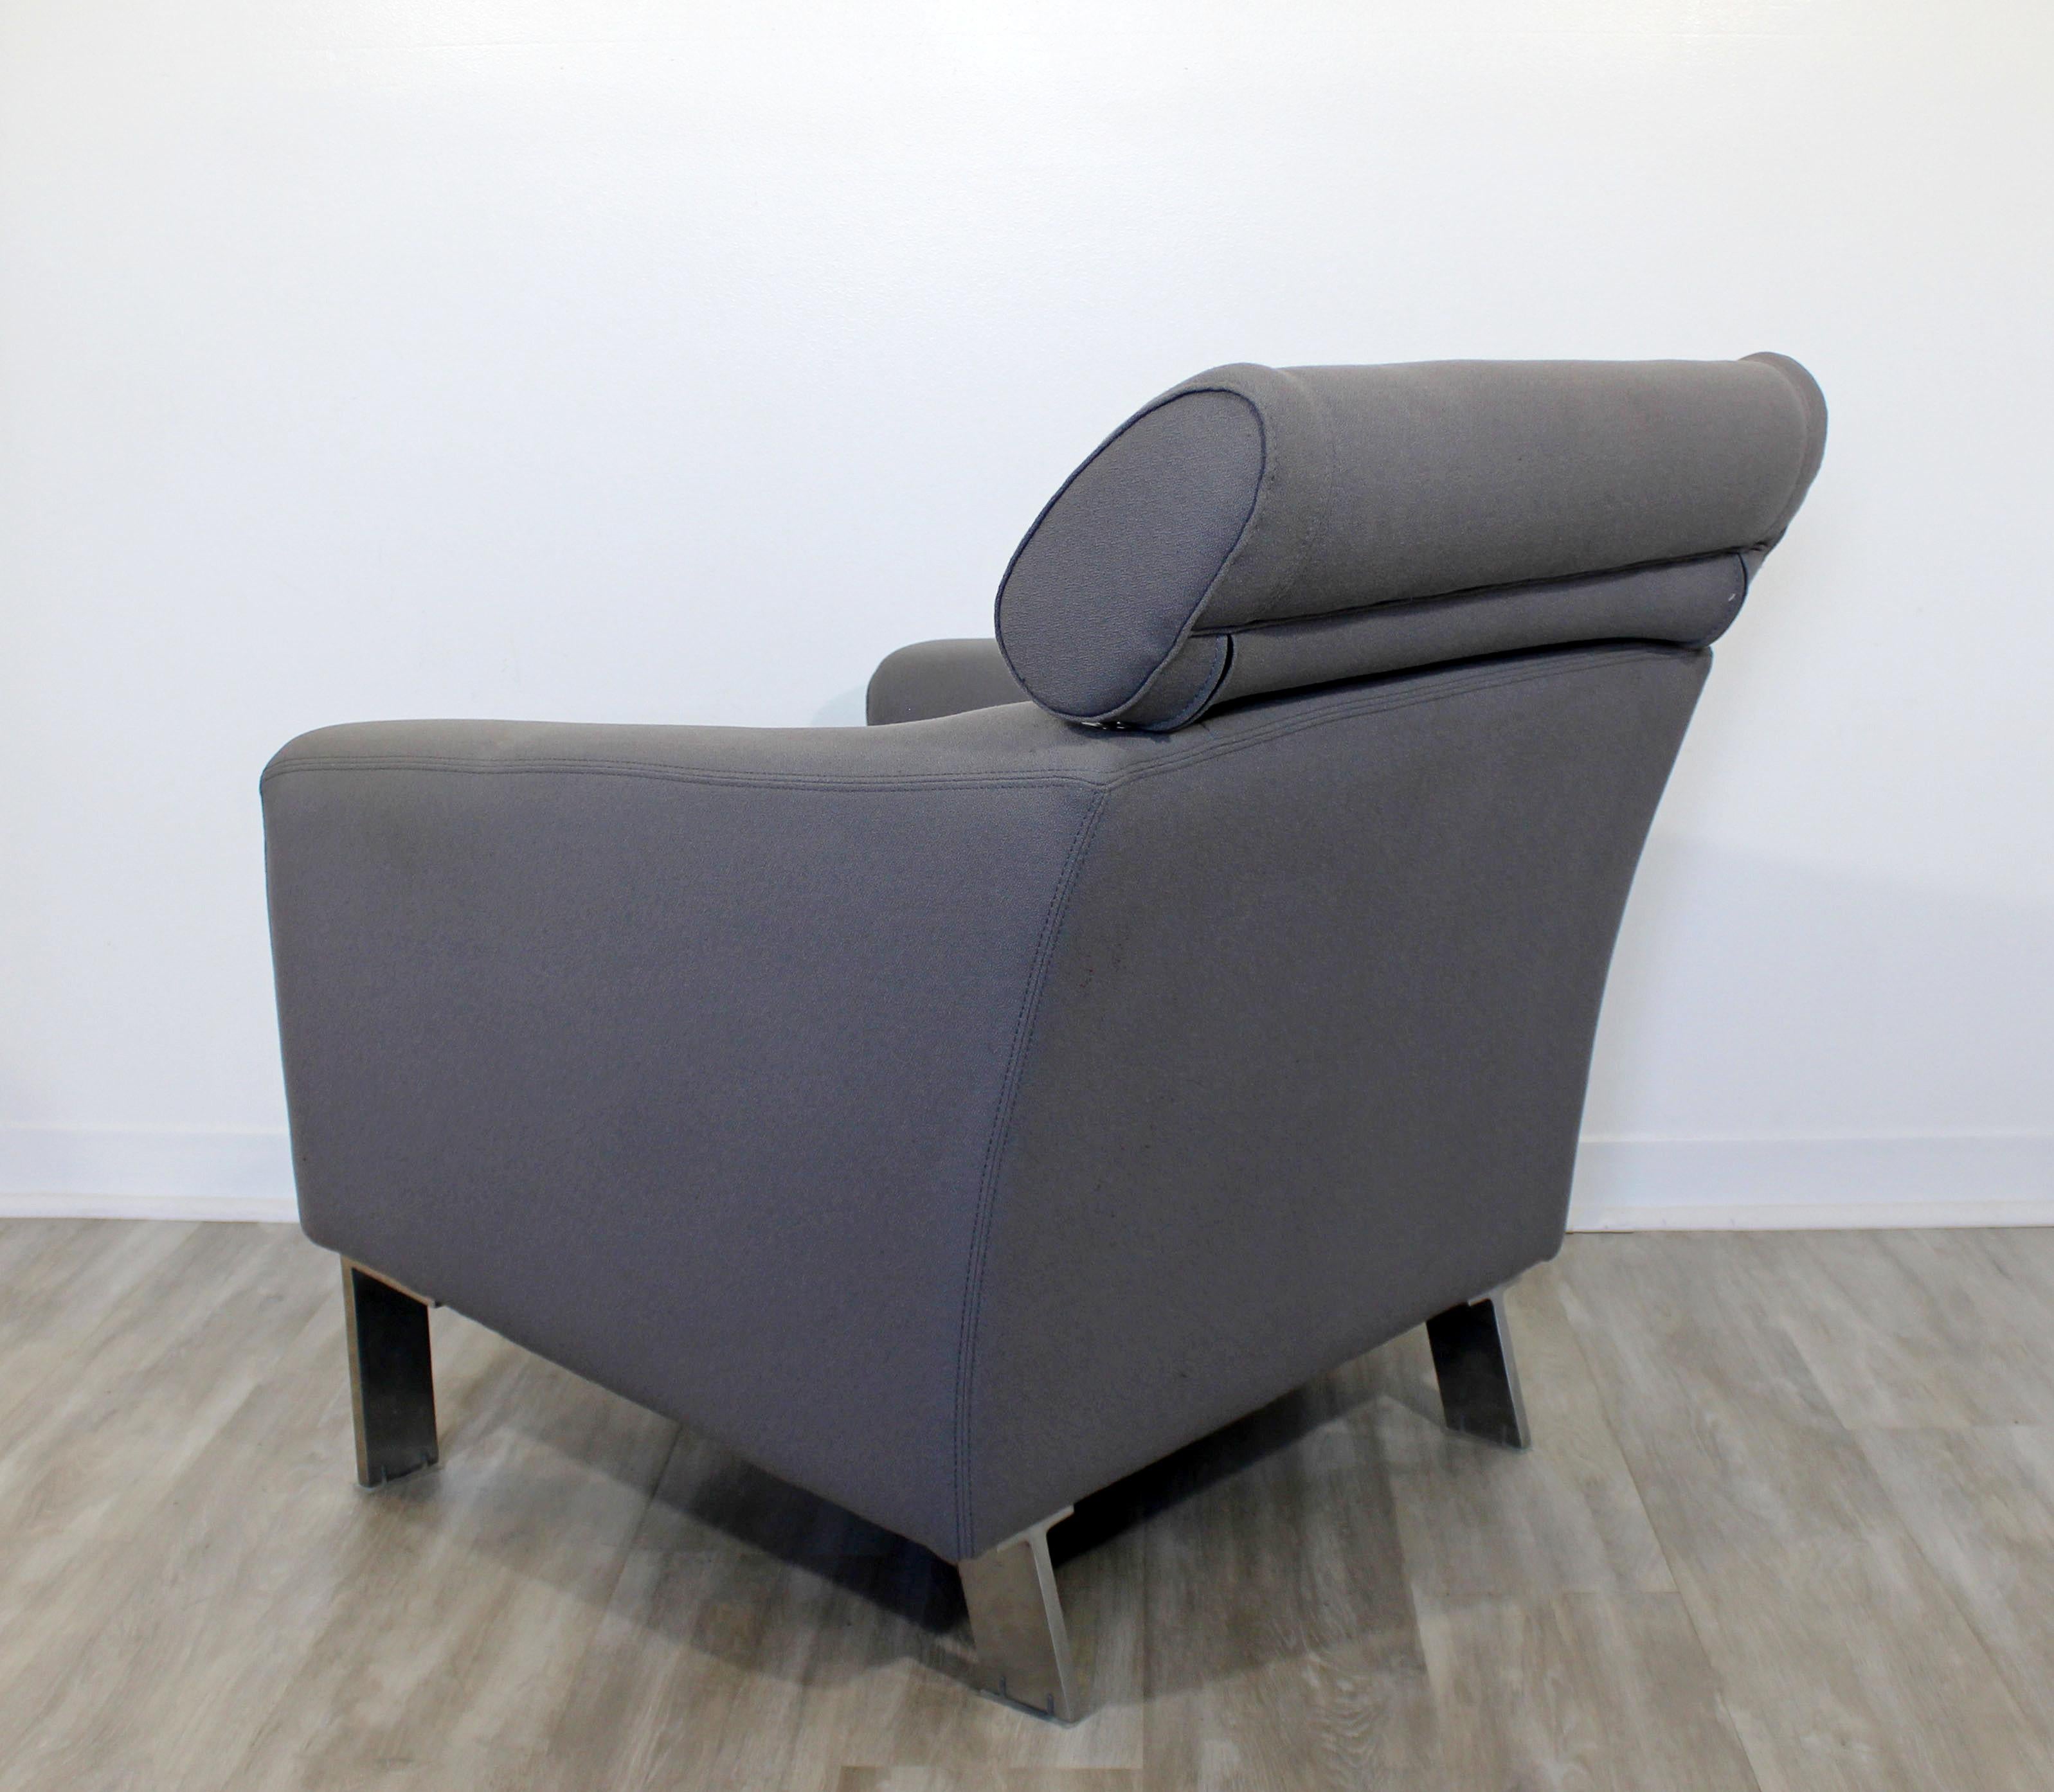 Late 20th Century Contemporary Modern Gray Patachou Lounge Armchair by Leolux Sculptural, 1980s